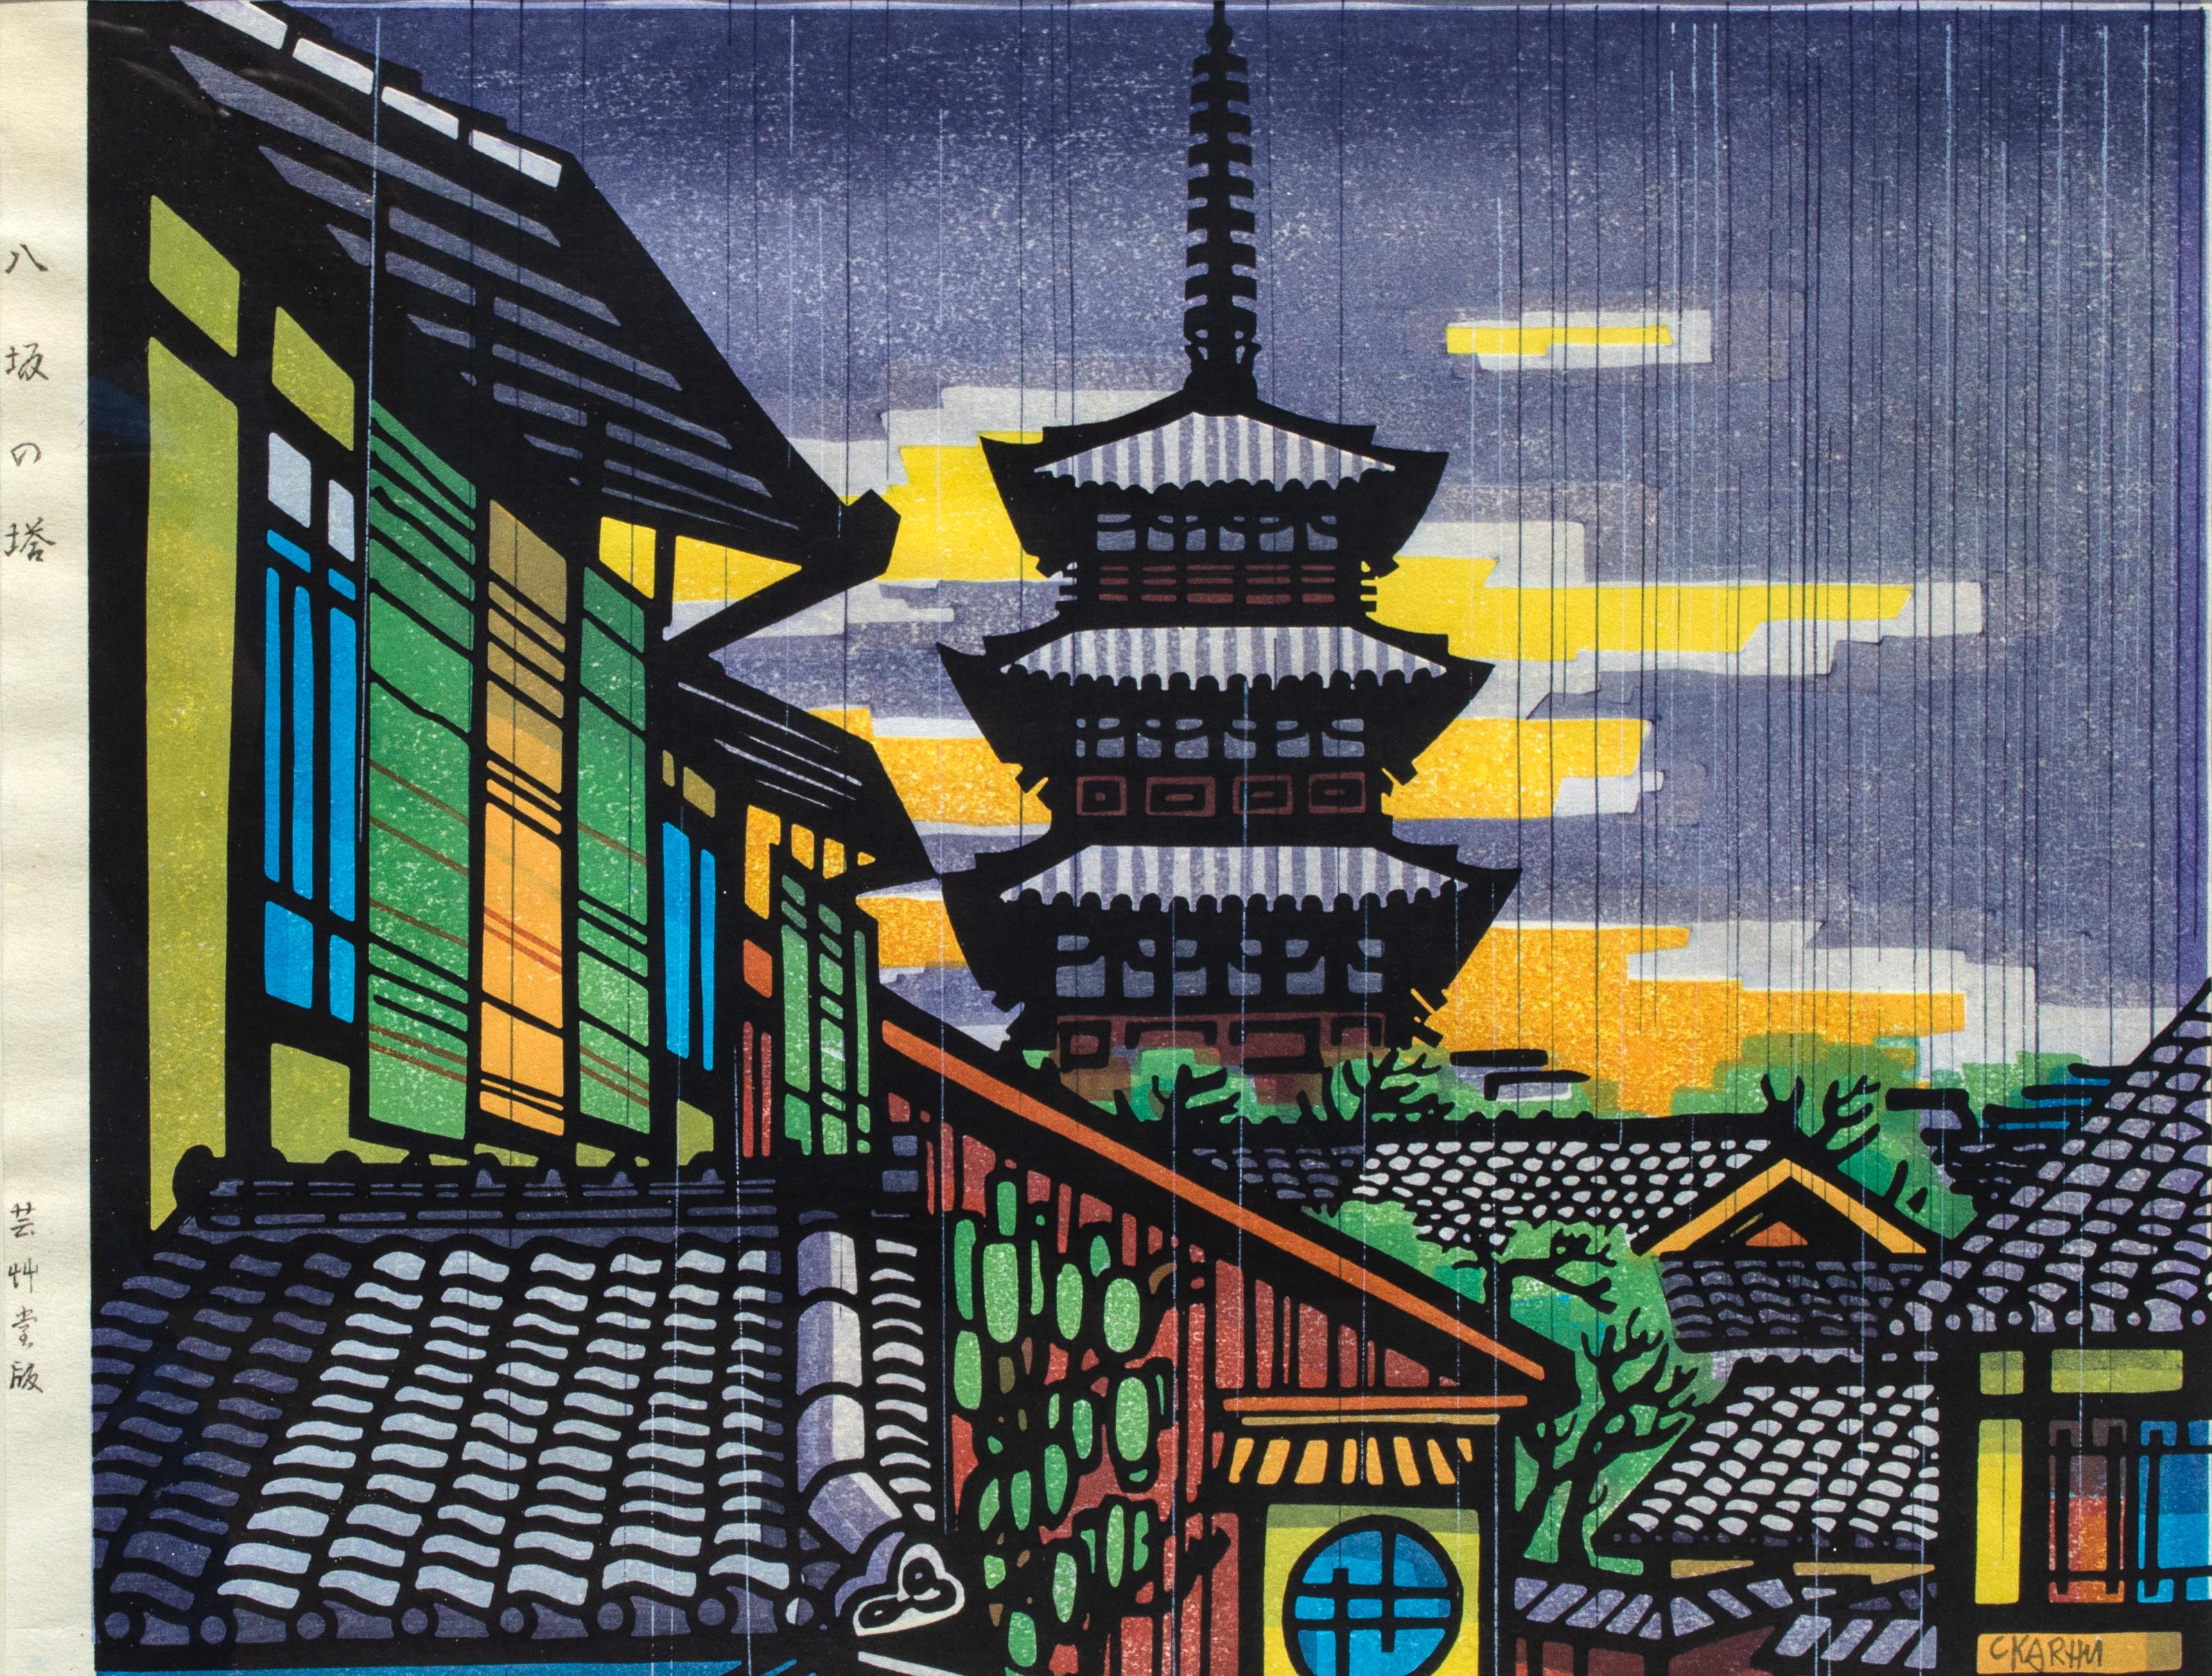 Clifton Karhu (1927-2007)
Pagoda at Yasaka, c. 1960s/1970s
Woodblock Print
Sight: 11 x 14 1/2 in.
Framed: 18 1/2 x 22 3/4 x 1 in.
Signed lower right in the plate: C Karhu

Karhu was born to a Finnish American family in rural Minnesota, north of